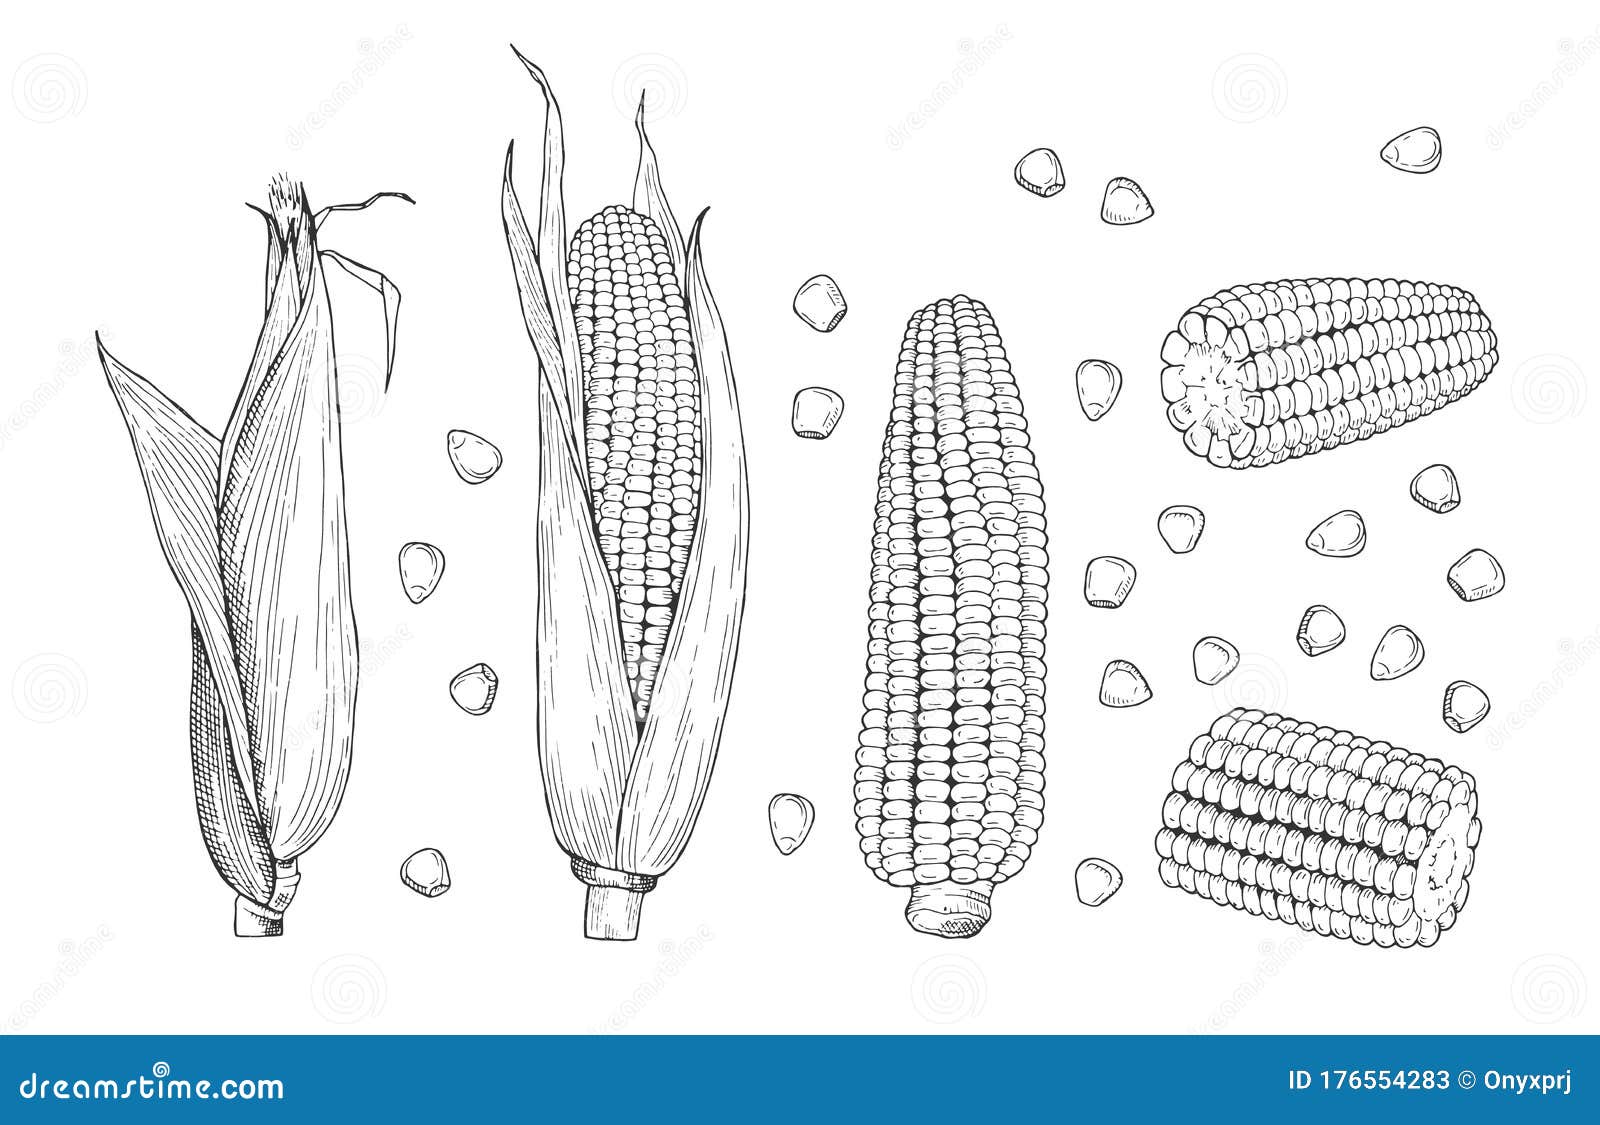 Corn Sketch. Sweet Botanical Plant. Isolated Vintage Healthy Corns, Hand  Drawn Cobs and Grains Stock Vector - Illustration of grain, line: 176554283